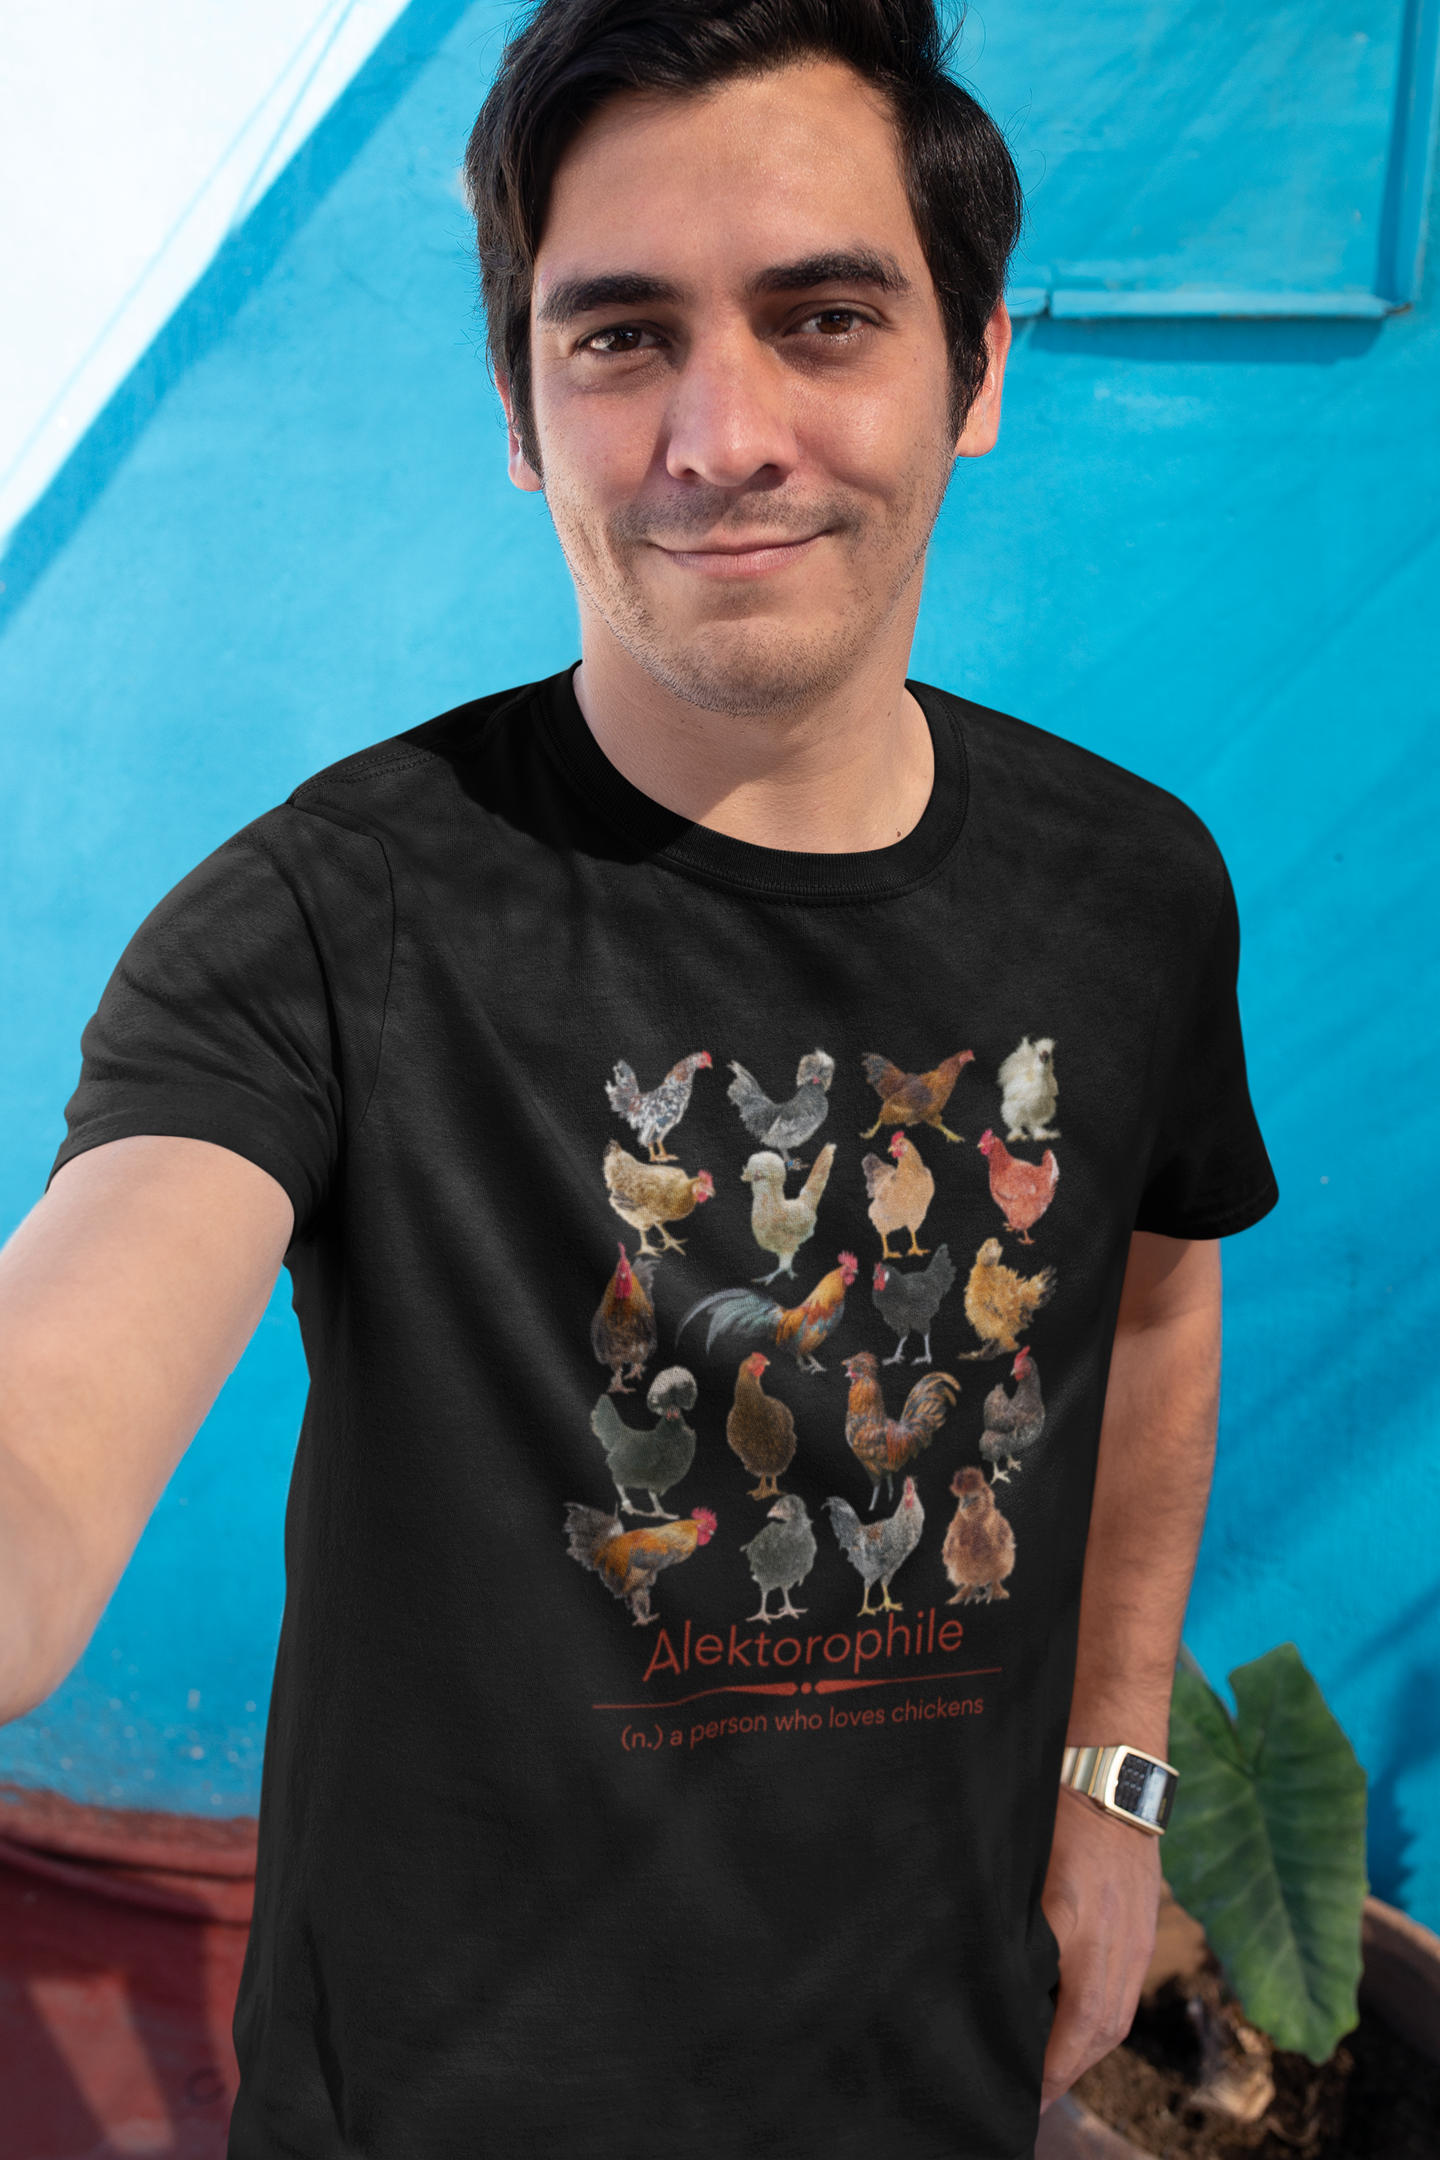 Smiling Latino man taking a selfie wearing a black t-shirt with 20 colorful chickens in a 4x5 pattern and underneath says 'Alektorophile - a person who loves chickens' silkies, bantams, polish, and many more.